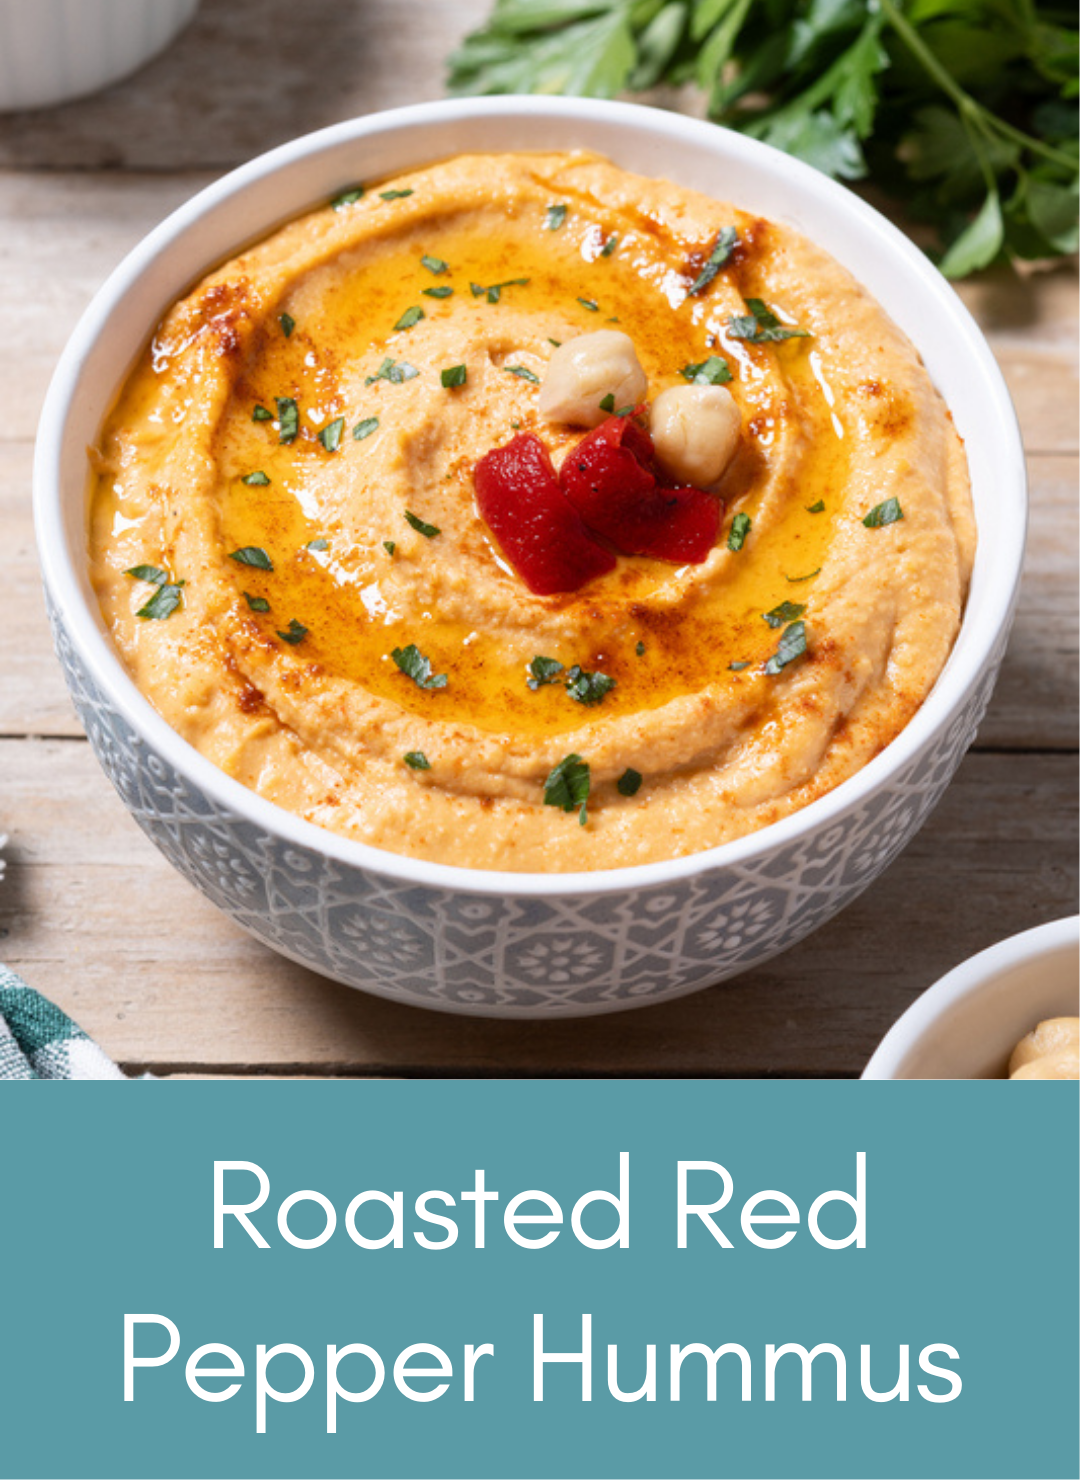 Whole food plant based roasted red pepper hummus Picture with link to recipe